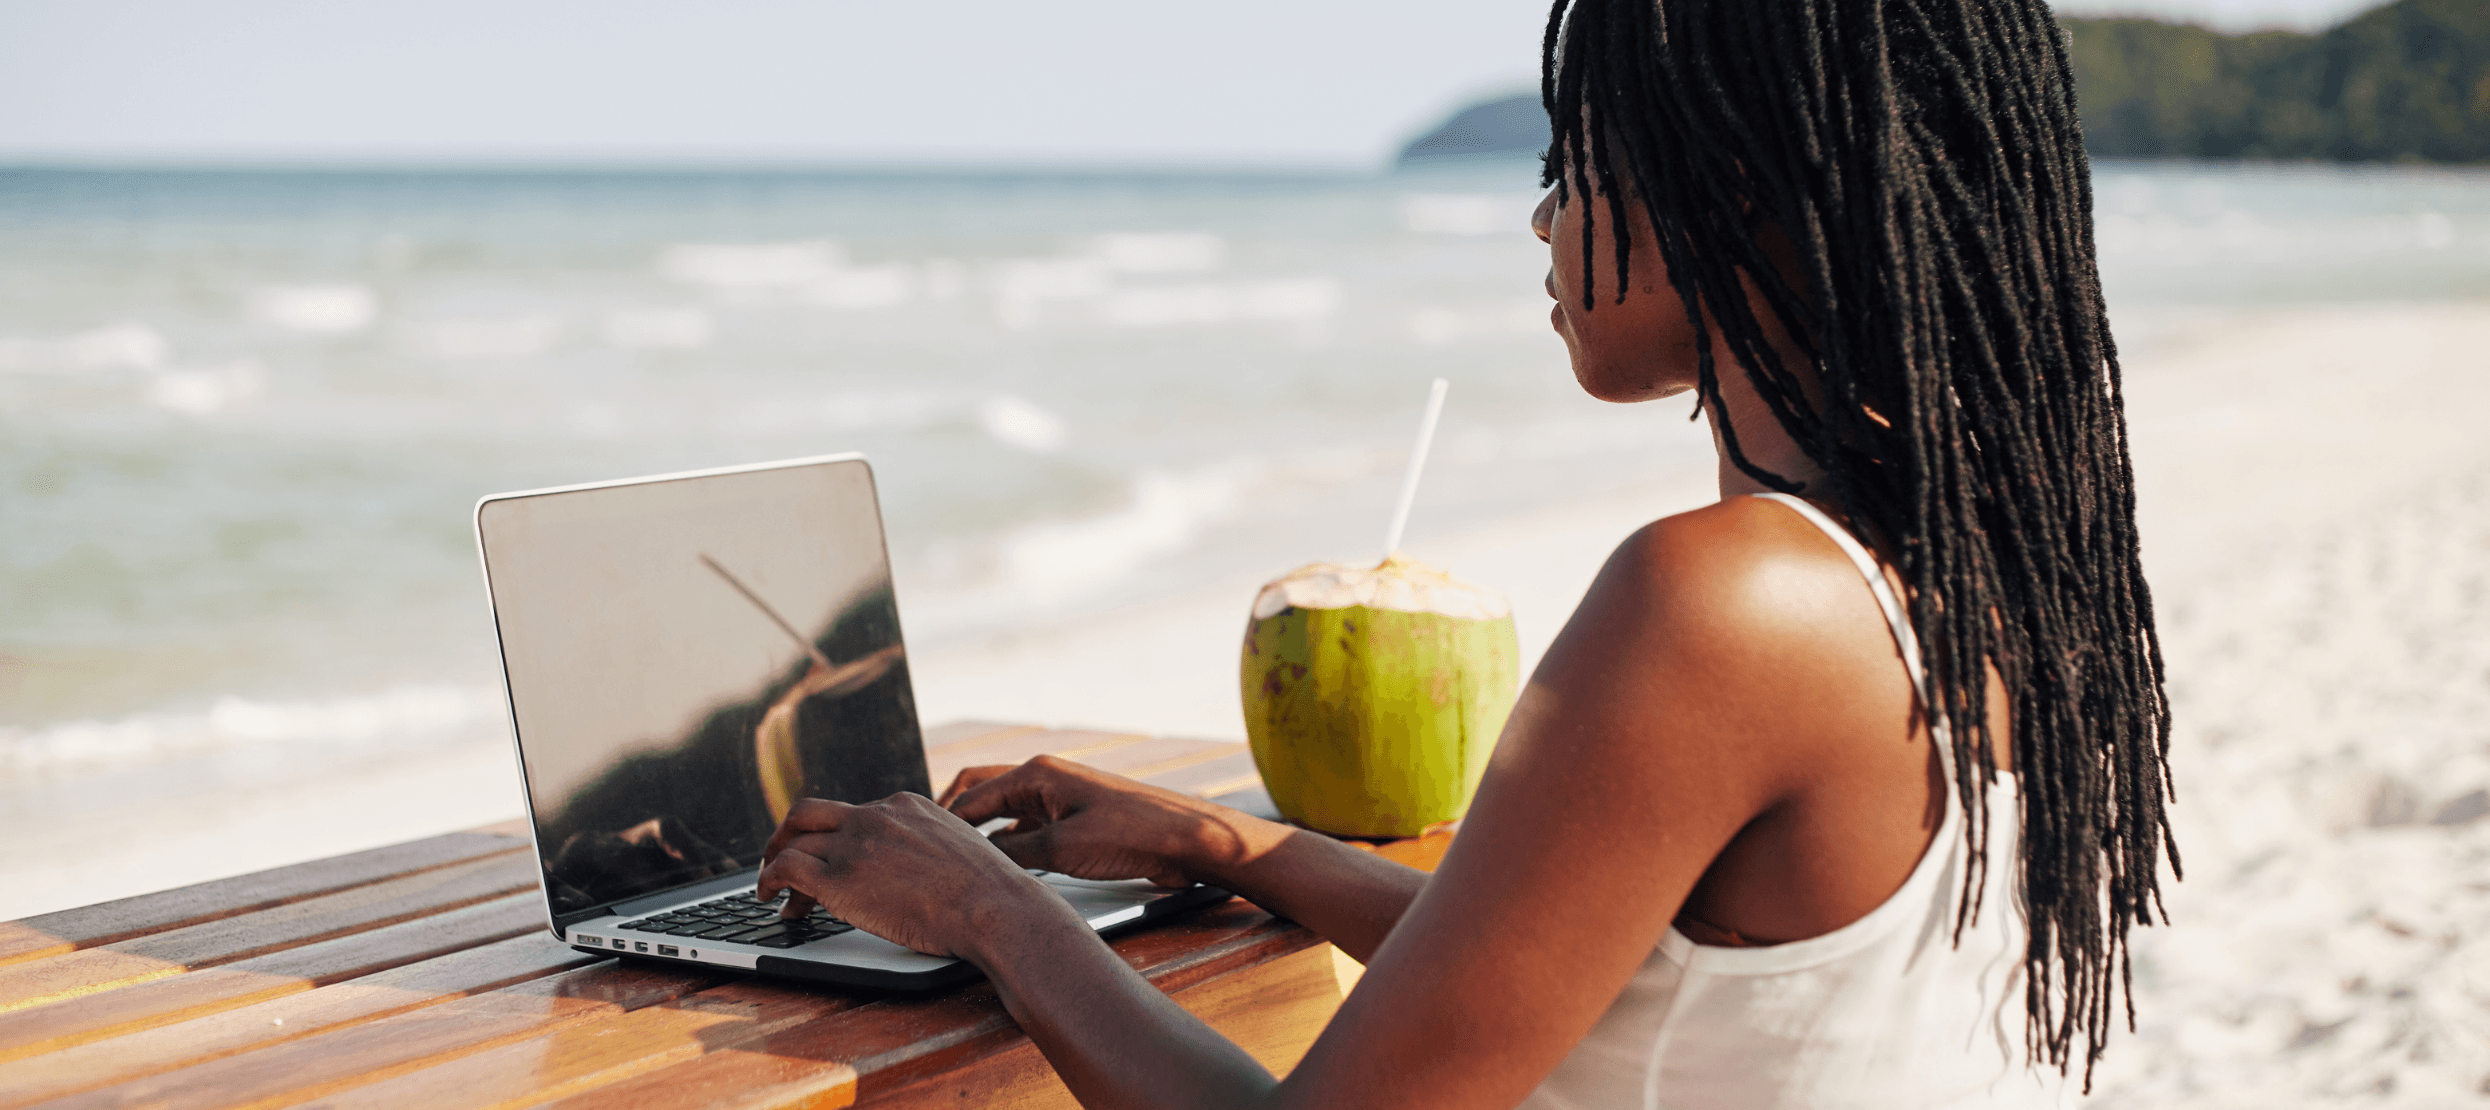 Managing Employee Vacation Requests During Summer Holidays: A HR Compliance Checklist